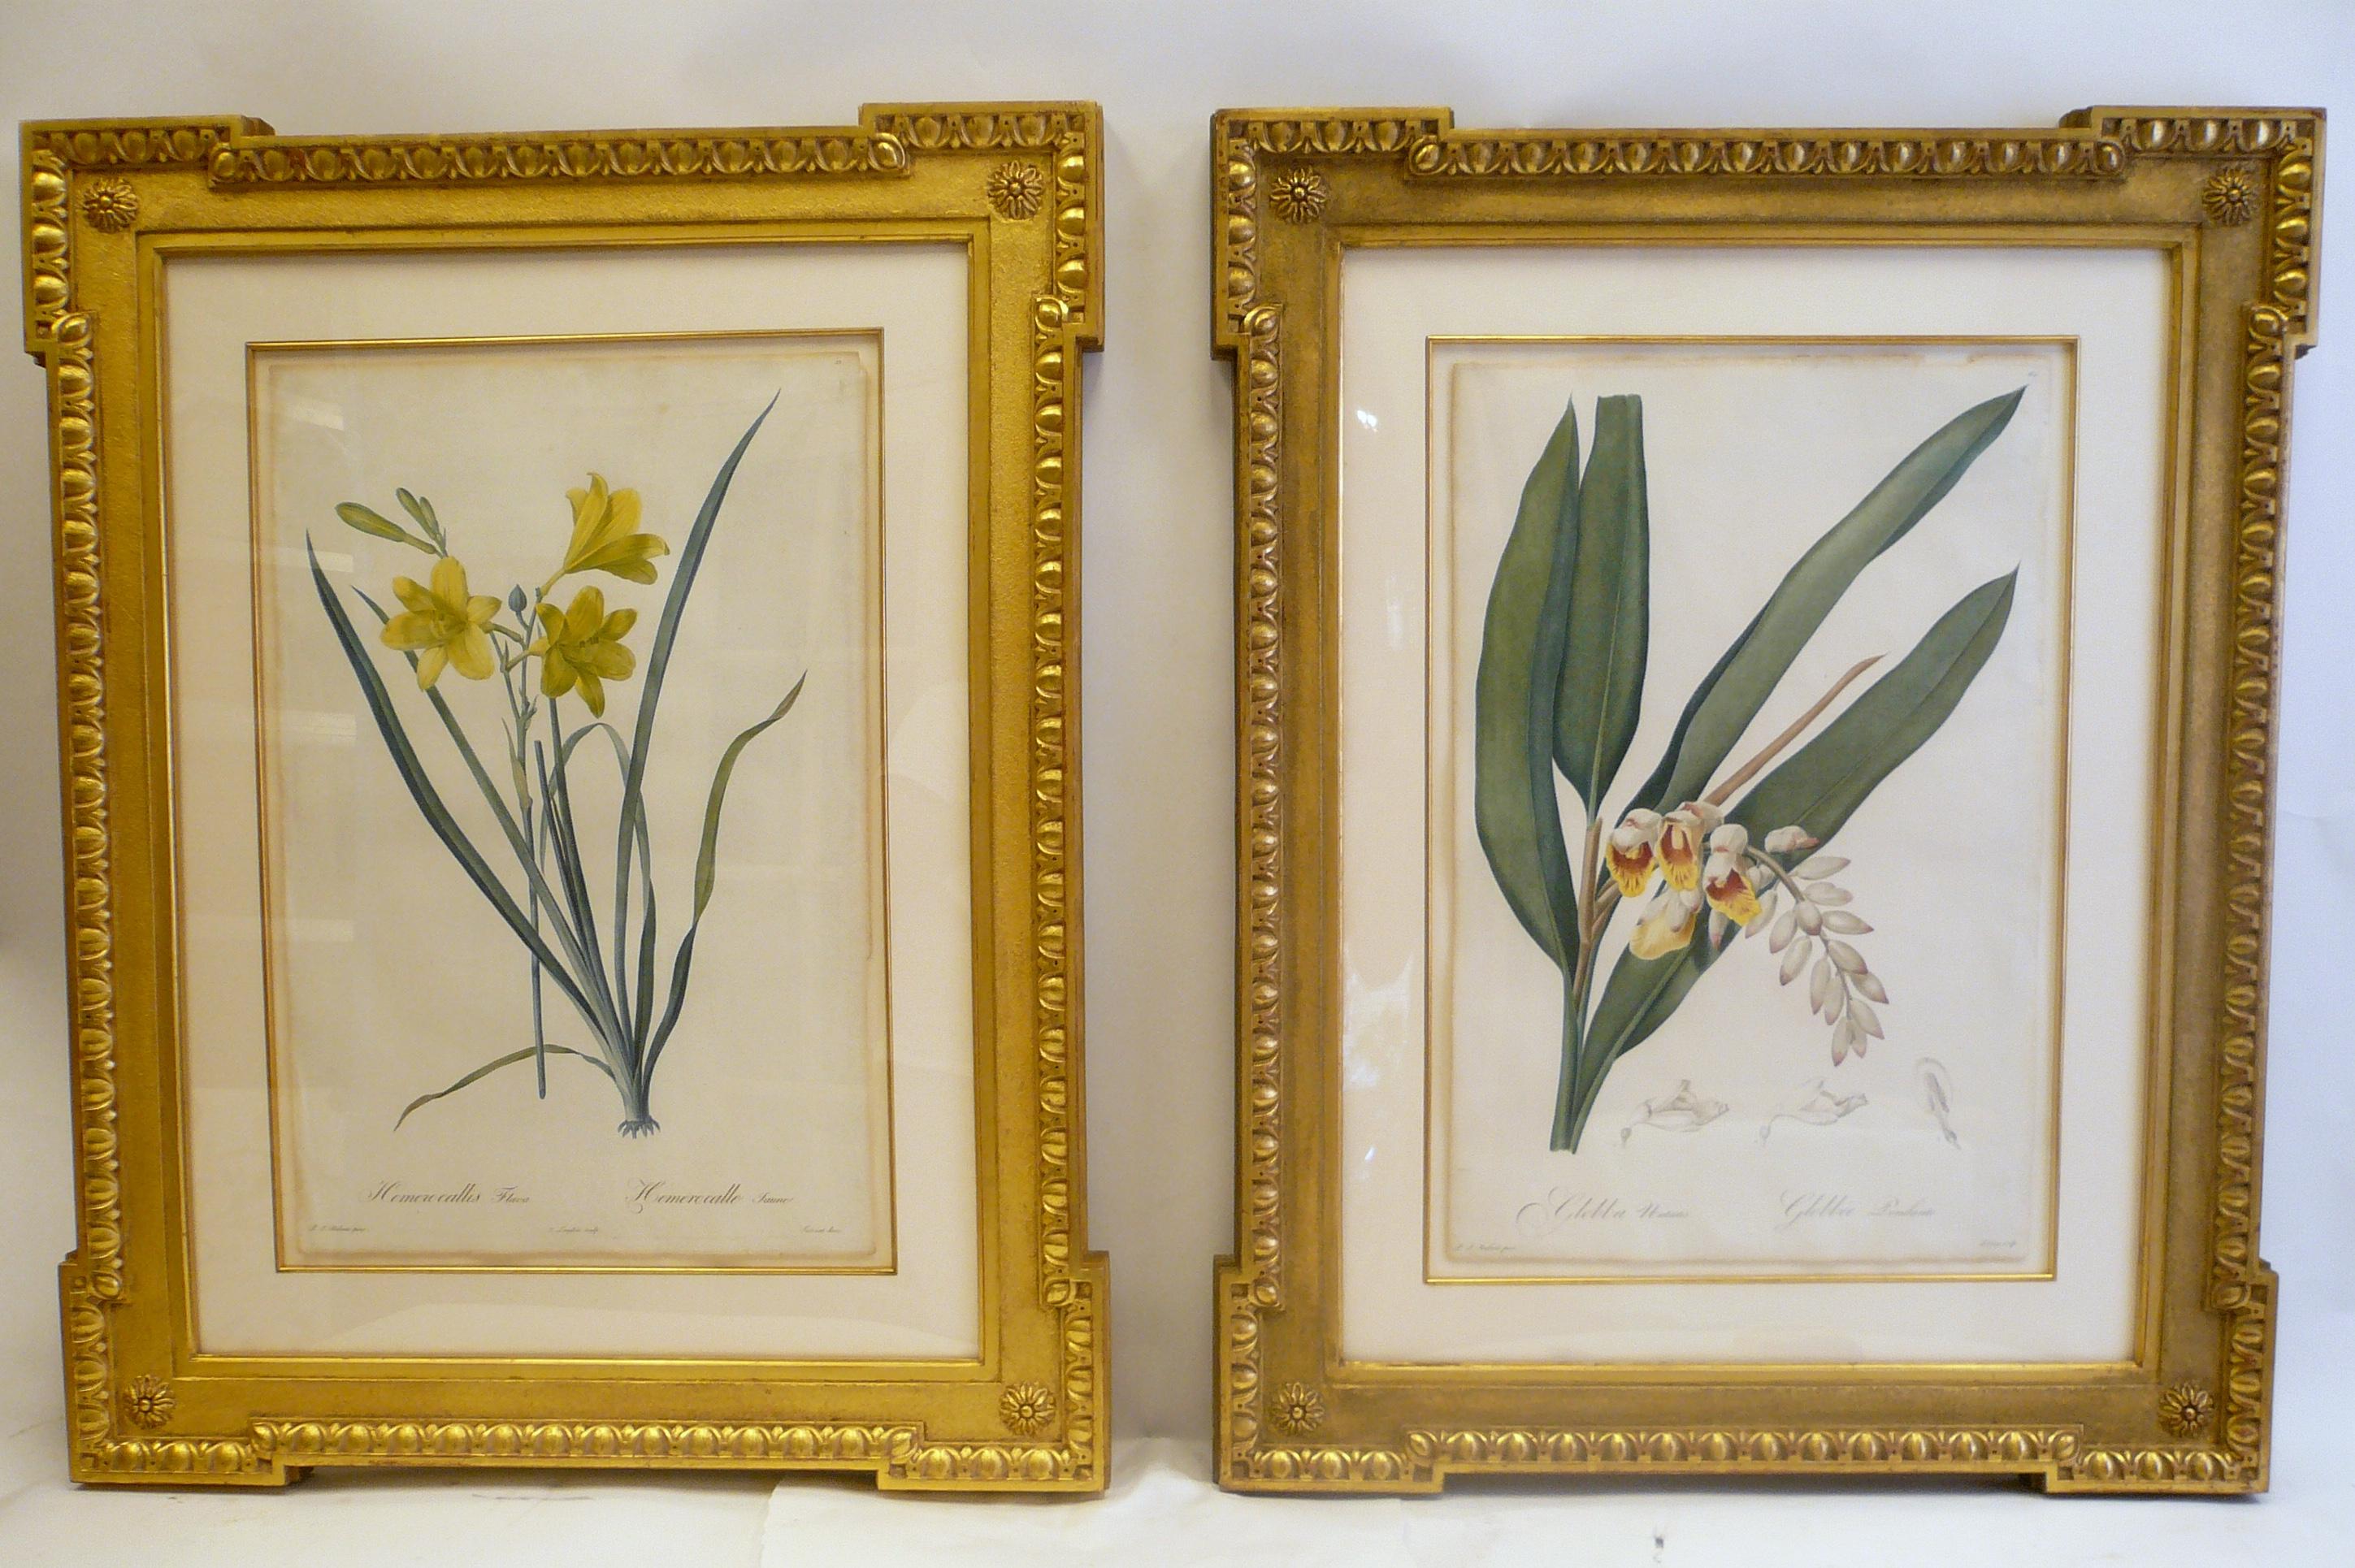 Paper Four Botanical Engravings by Pierre Joseph Redoute